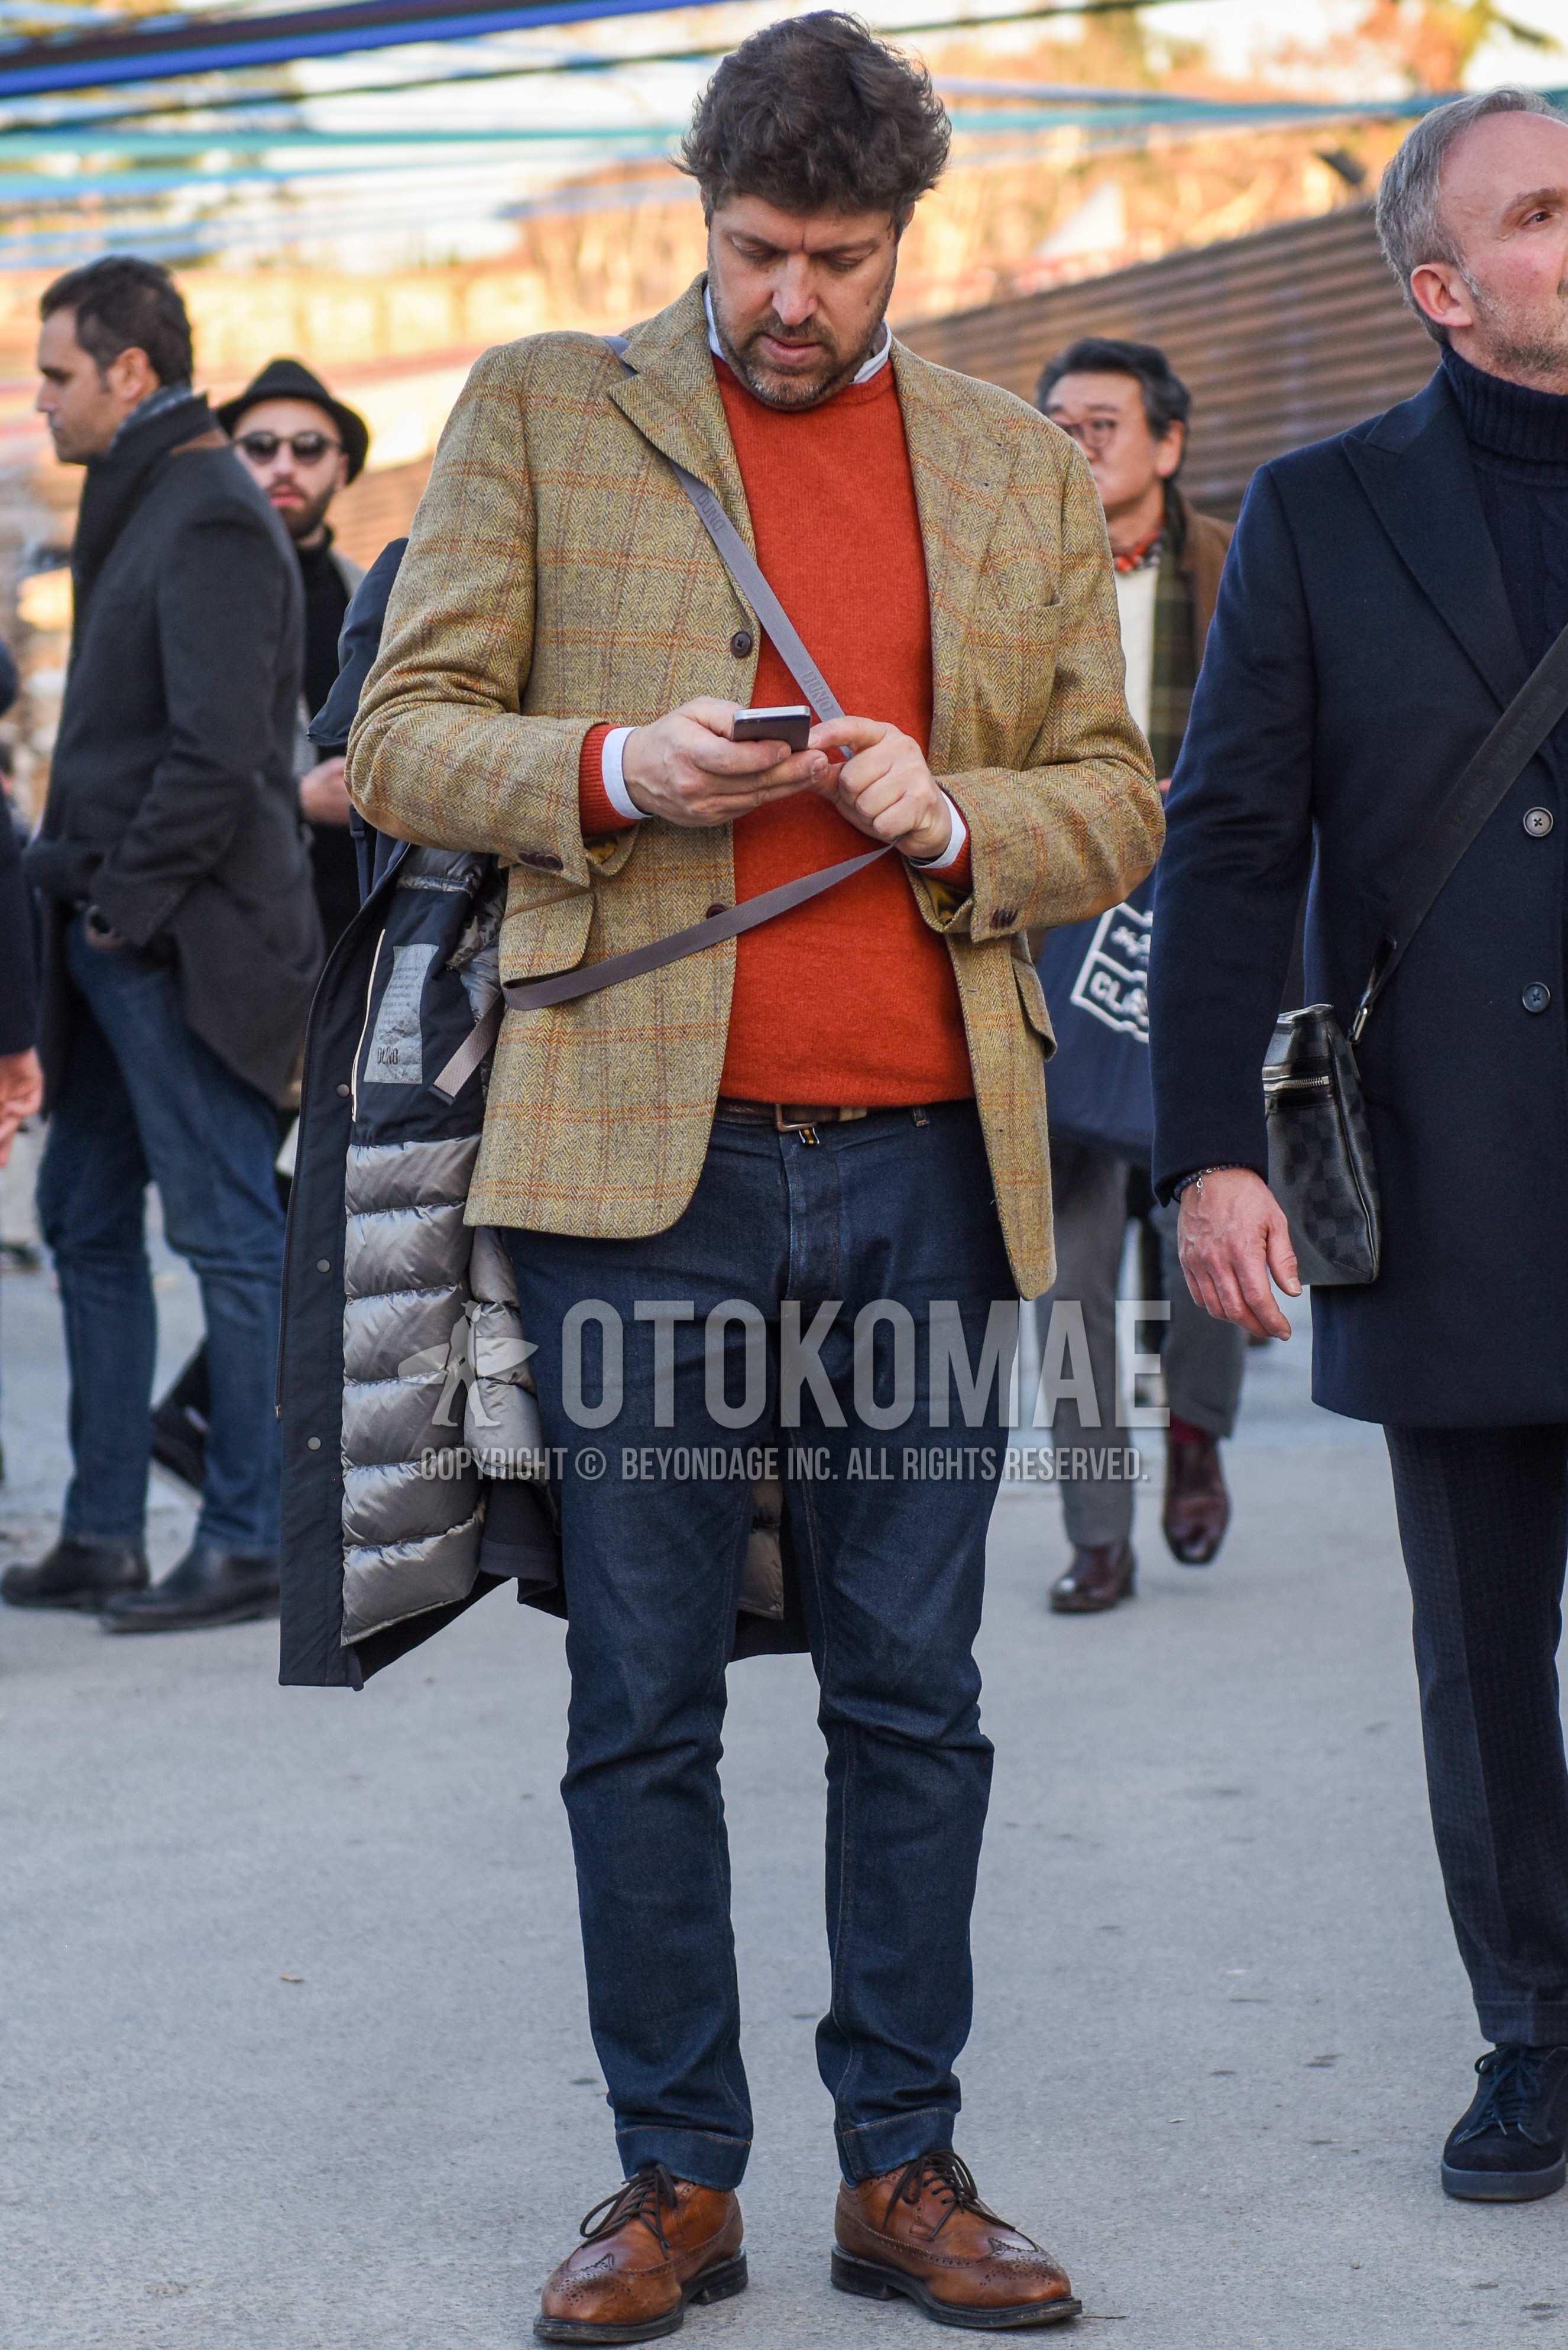 Men's spring autumn outfit with beige check tailored jacket, orange plain sweater, white plain shirt, brown plain leather belt, navy plain denim/jeans, brown wing-tip shoes leather shoes.